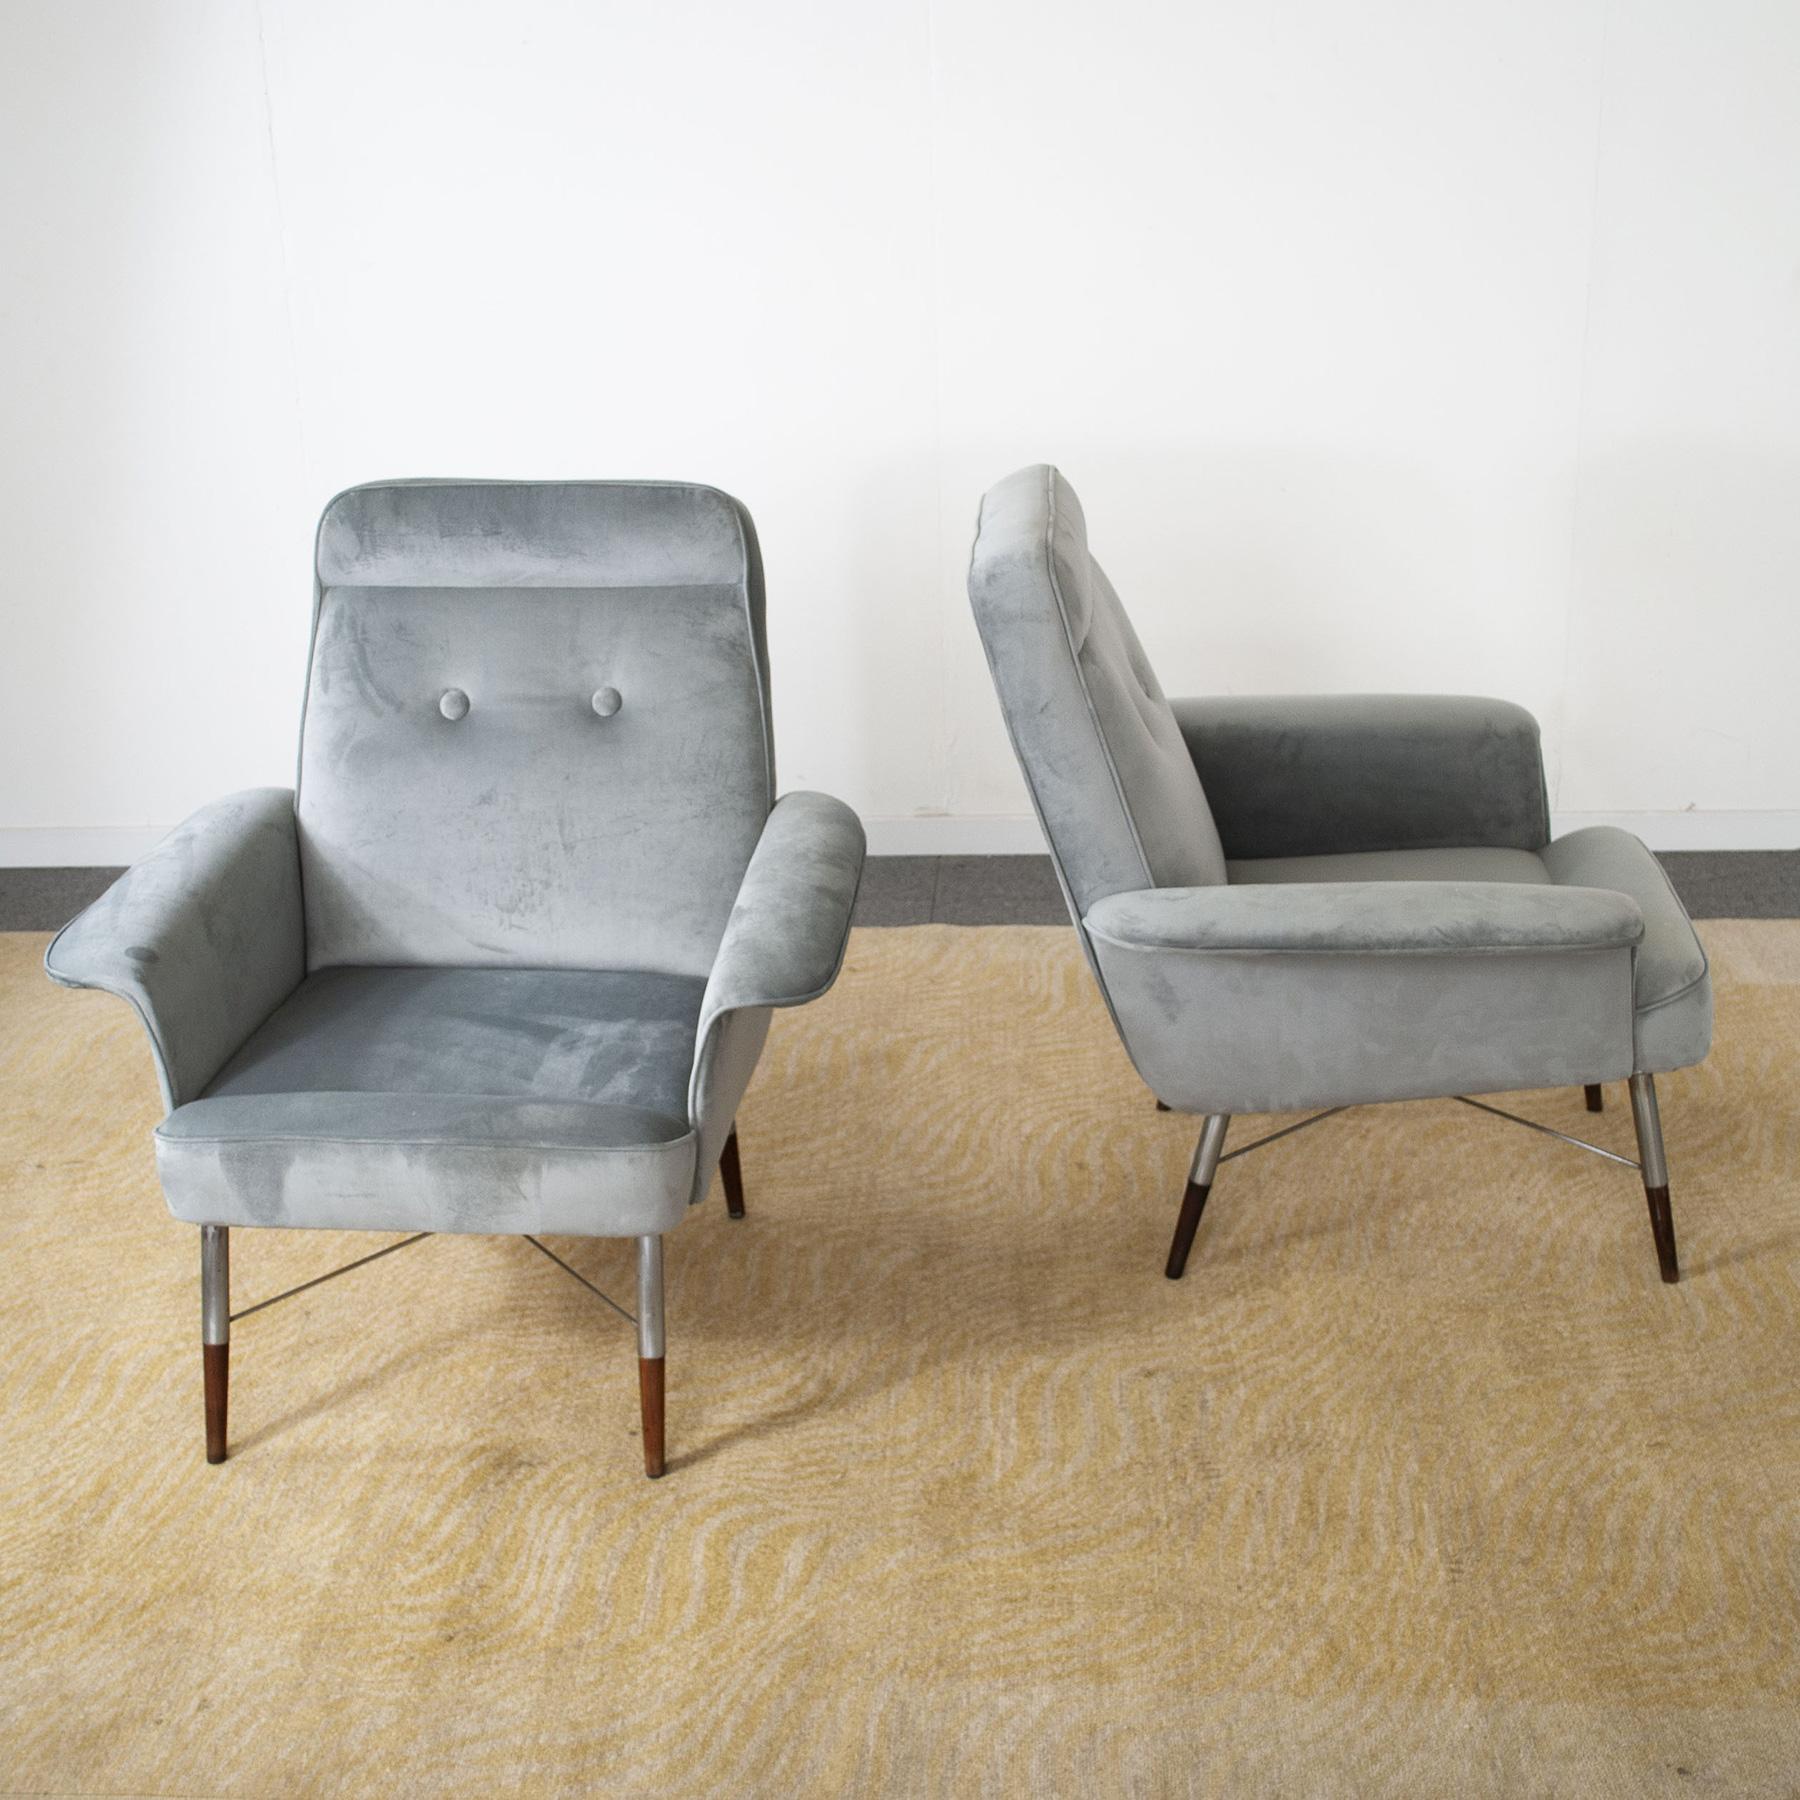 Italian Mid-Century Pair of Armchairs from the Sixties In Good Condition For Sale In bari, IT